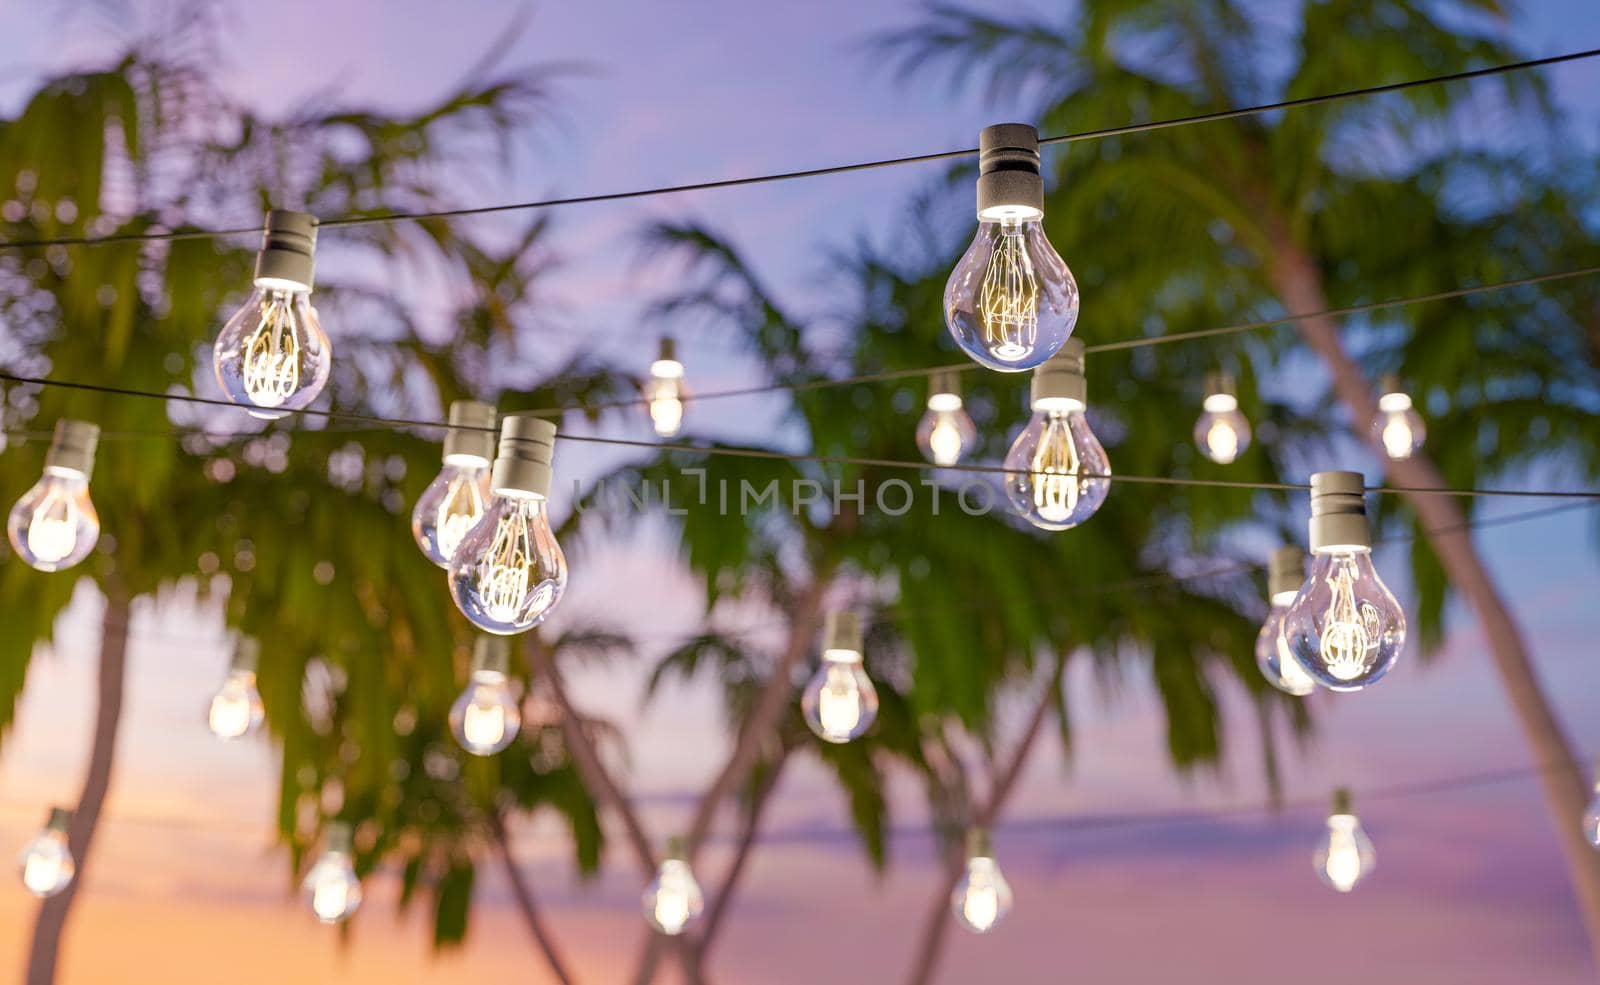 3D illustration of light bulbs hanging on wires against exotic palms and sunset sky on beach